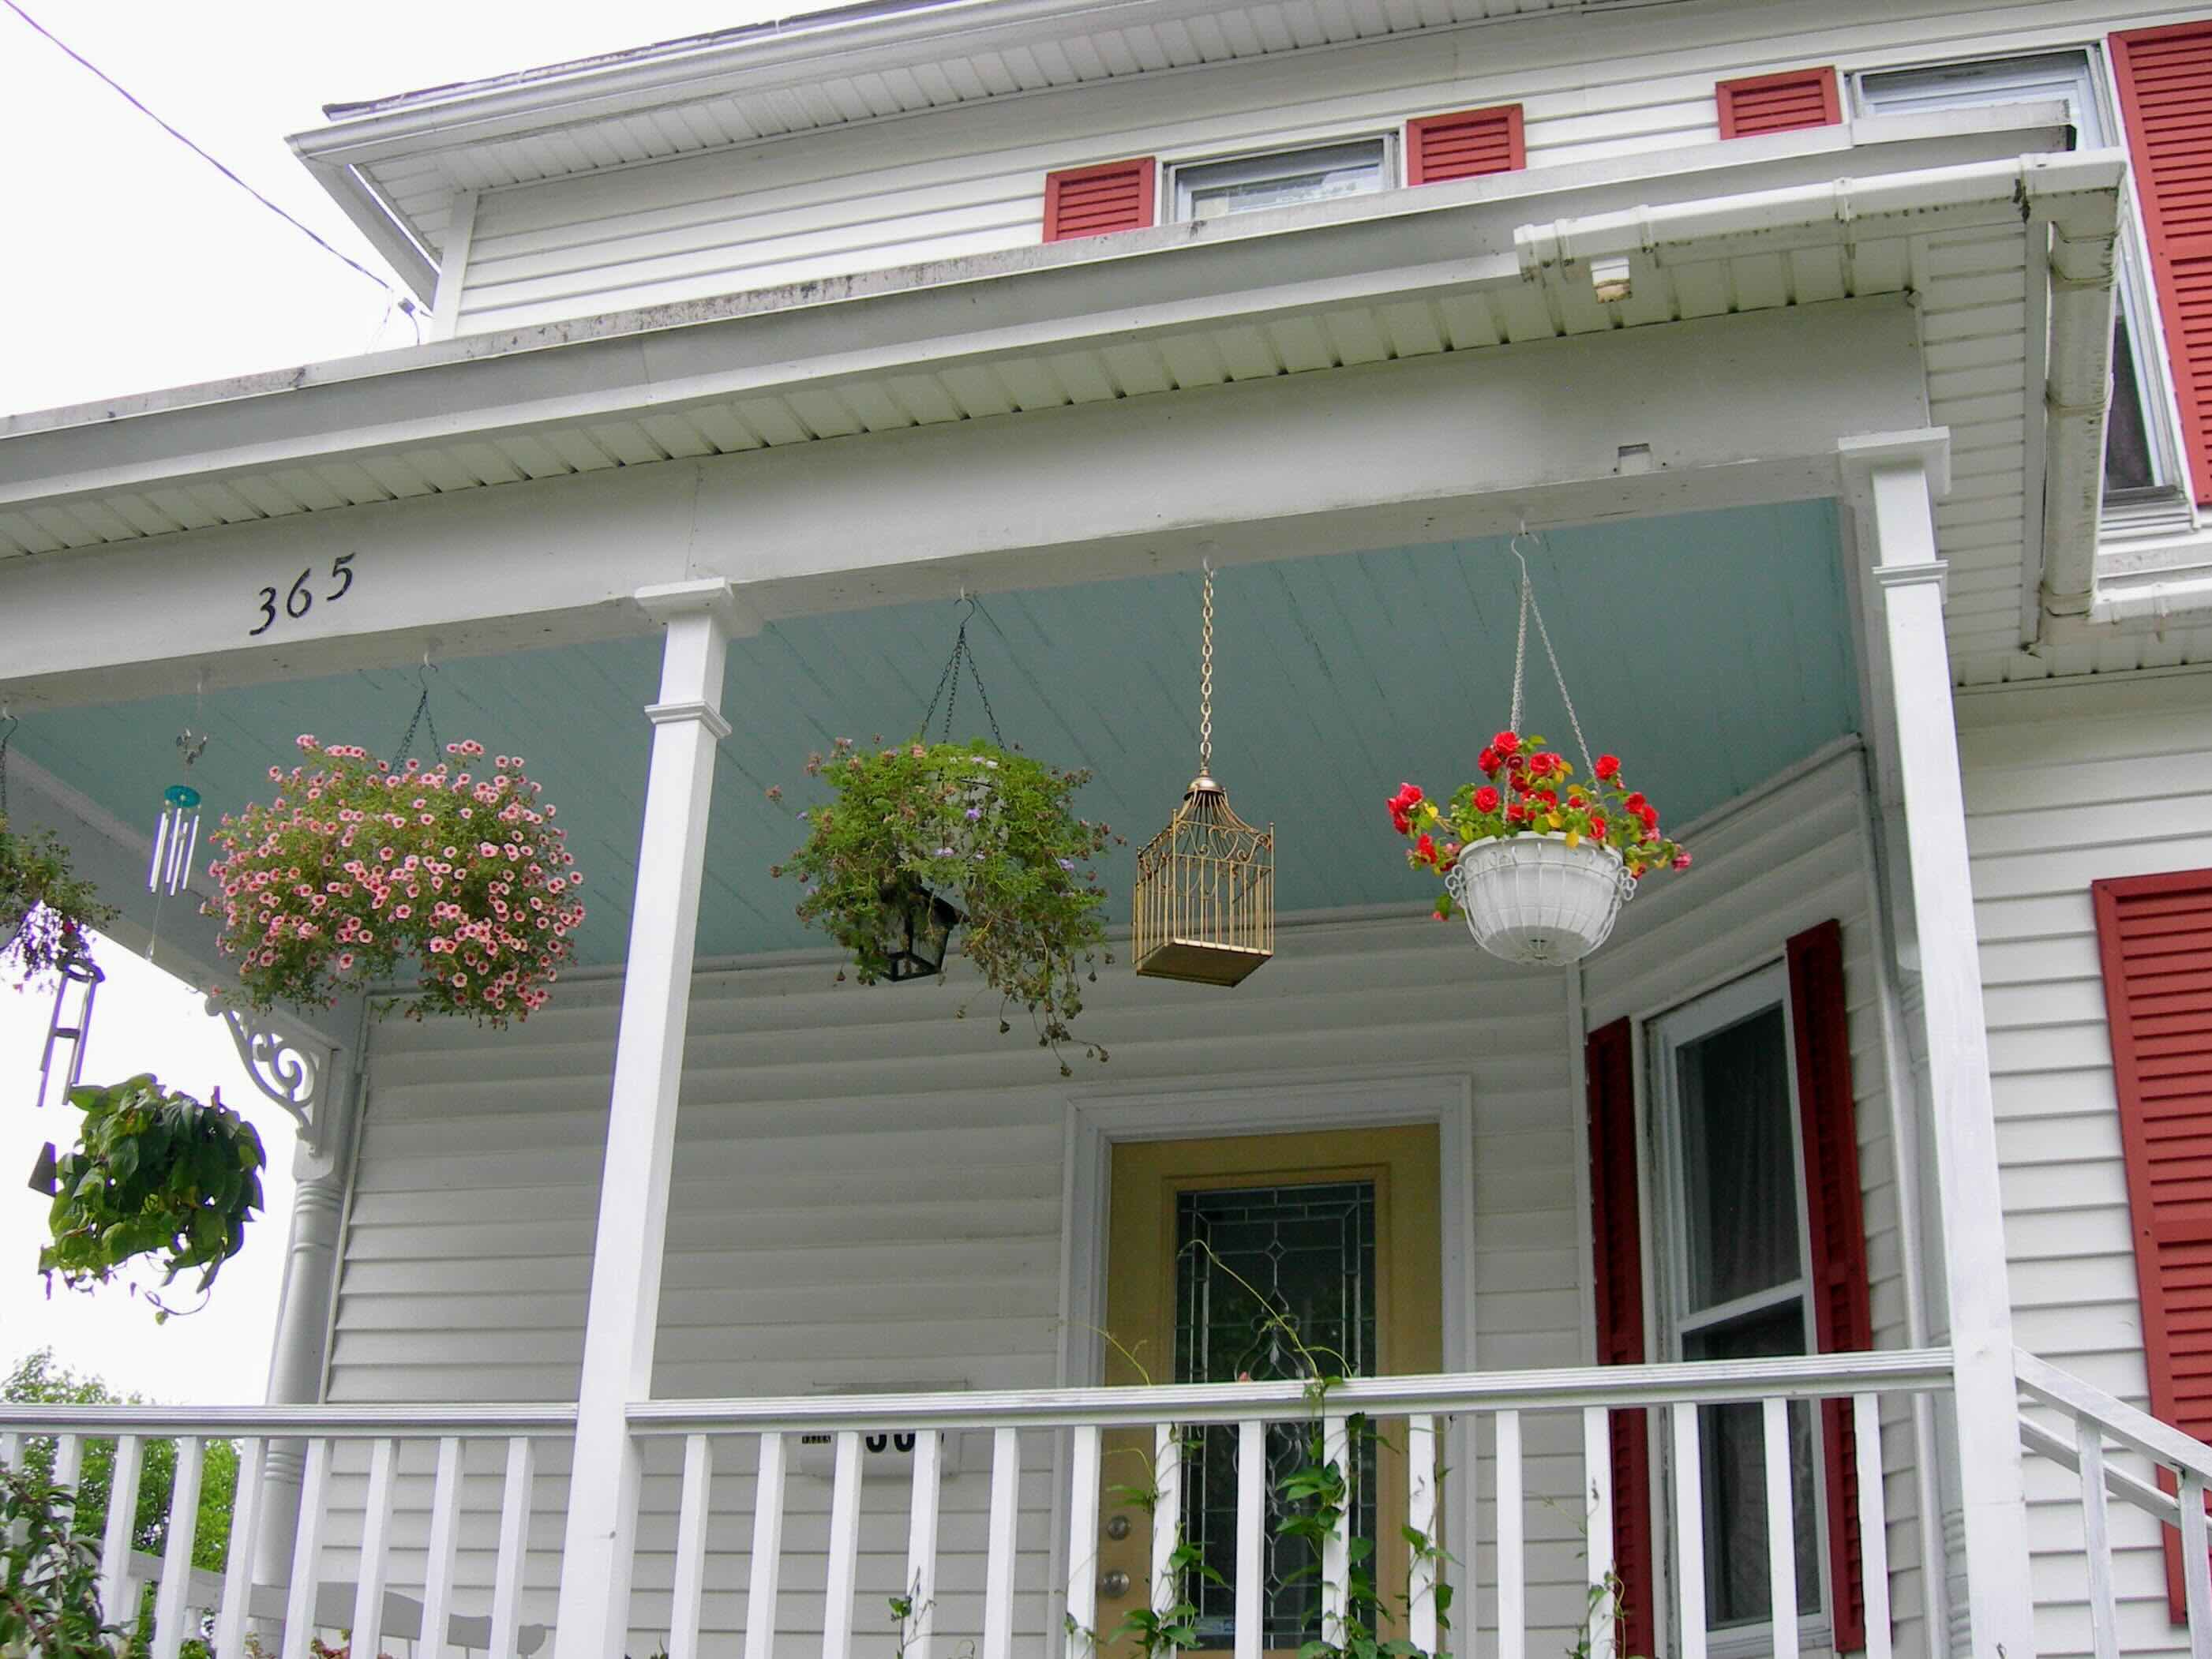 Why Are Some Porch Ceilings Painted Blue?